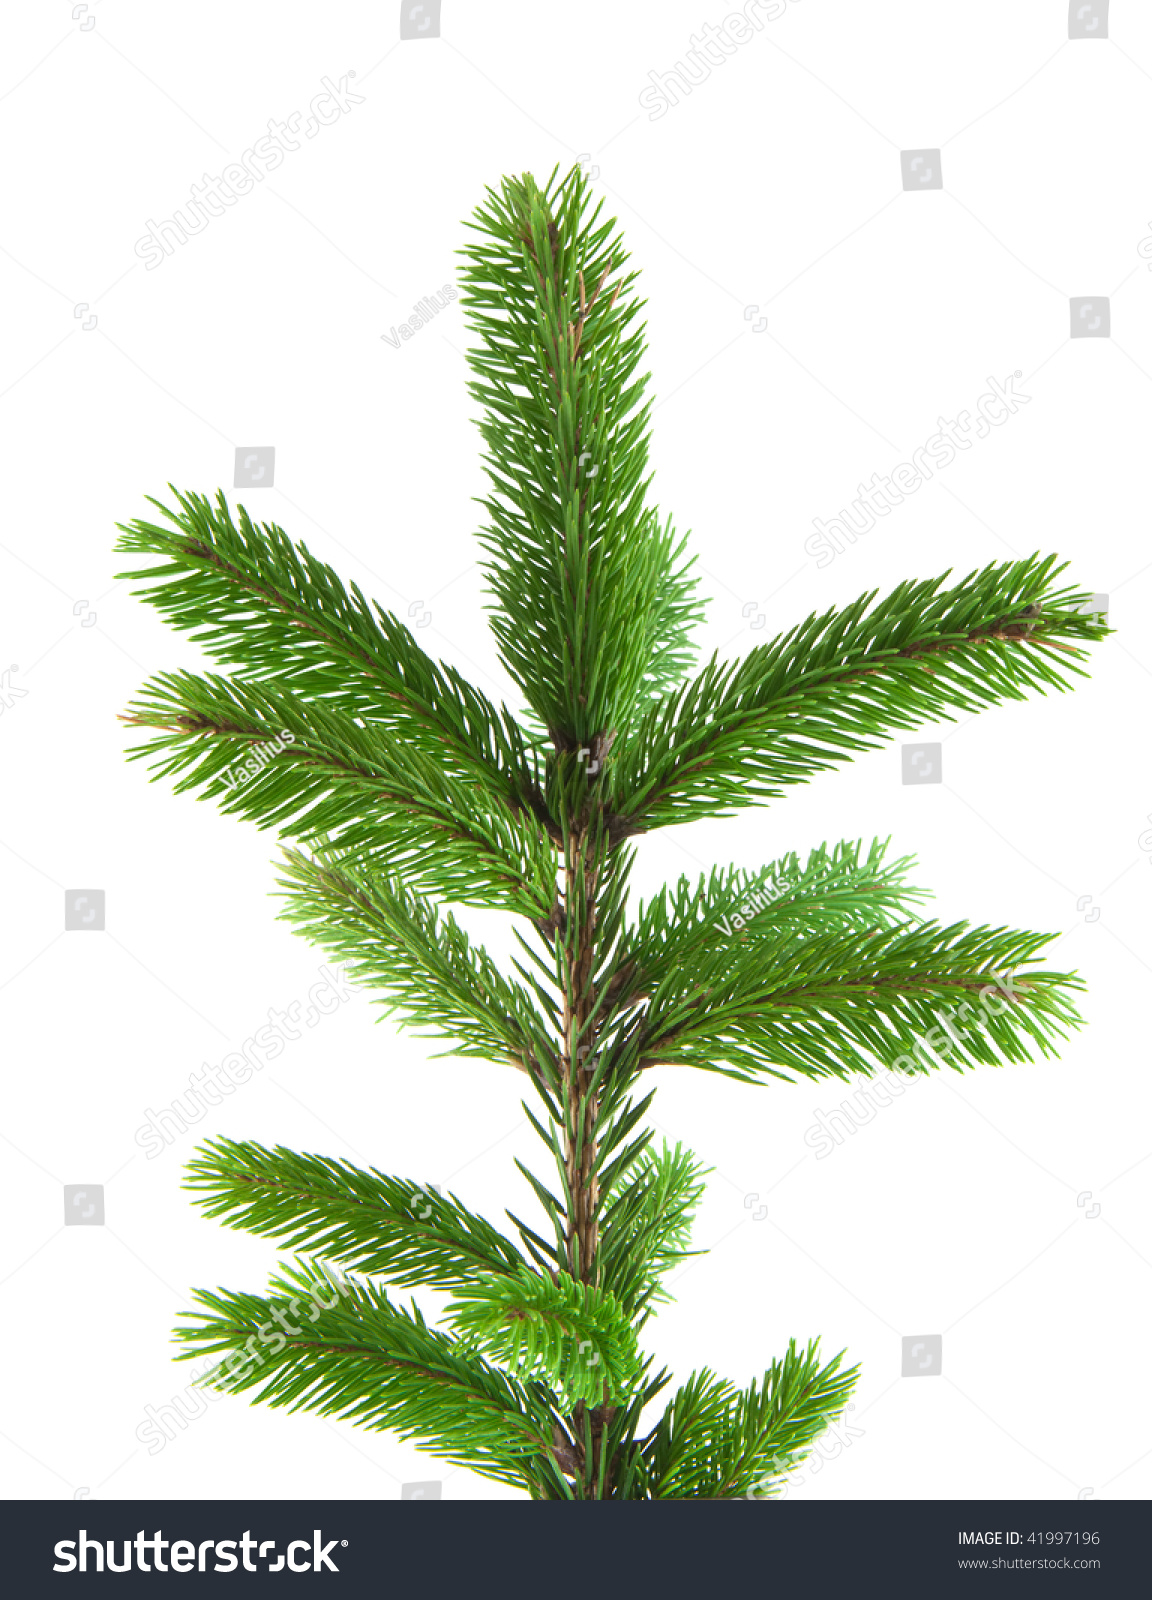 Pine fur tree branch isolated on white for Christmas decoration #41997196